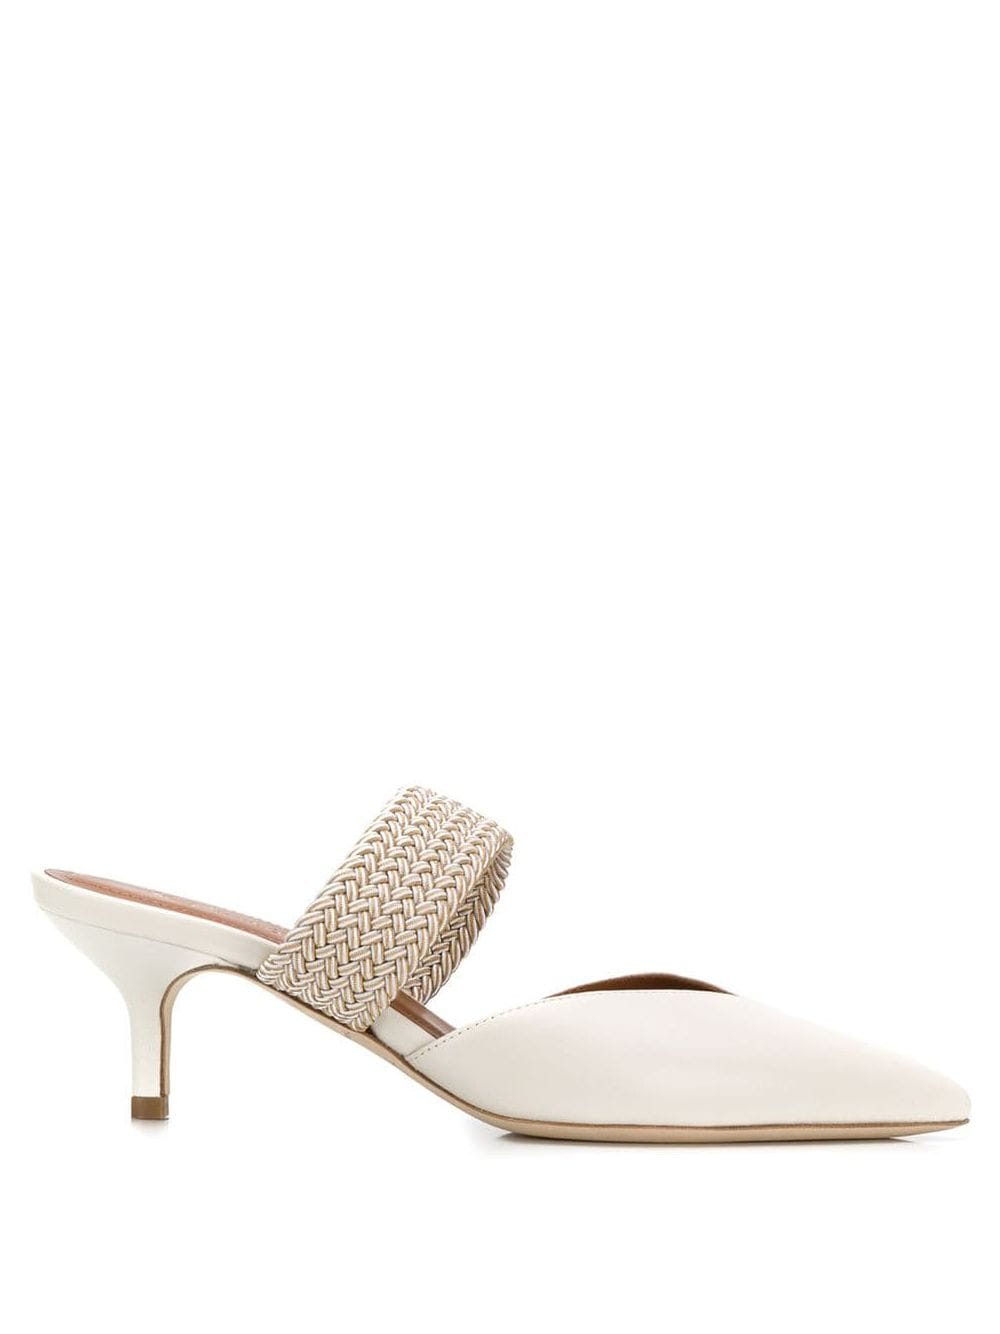 Malone Souliers 'Maisie' Mules - Nude von Malone Souliers